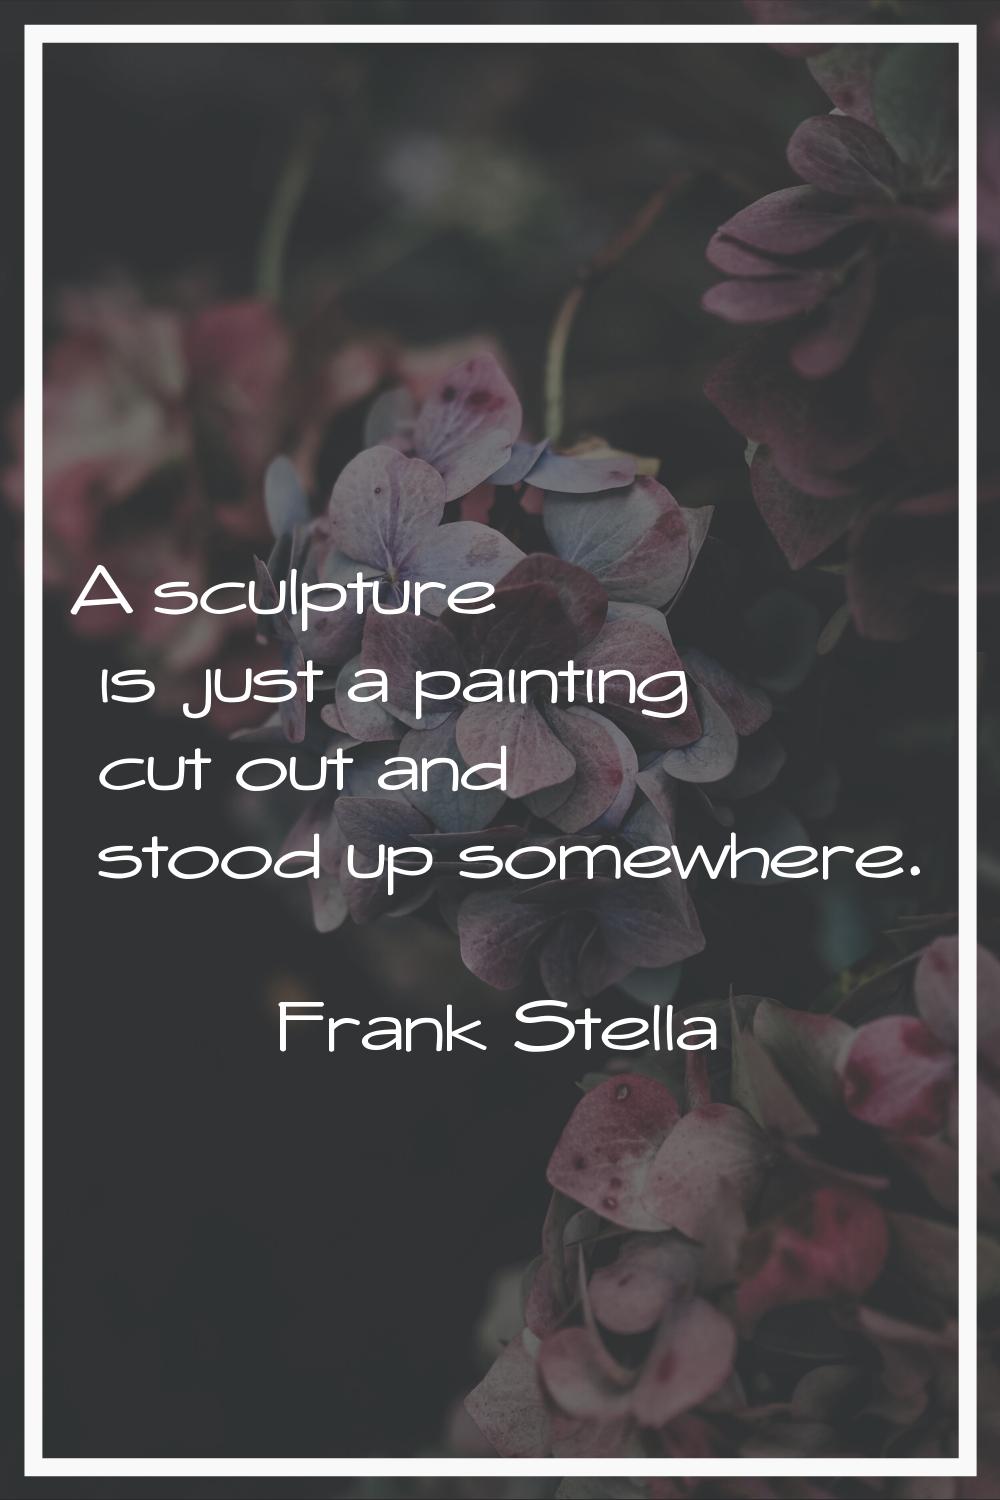 A sculpture is just a painting cut out and stood up somewhere.